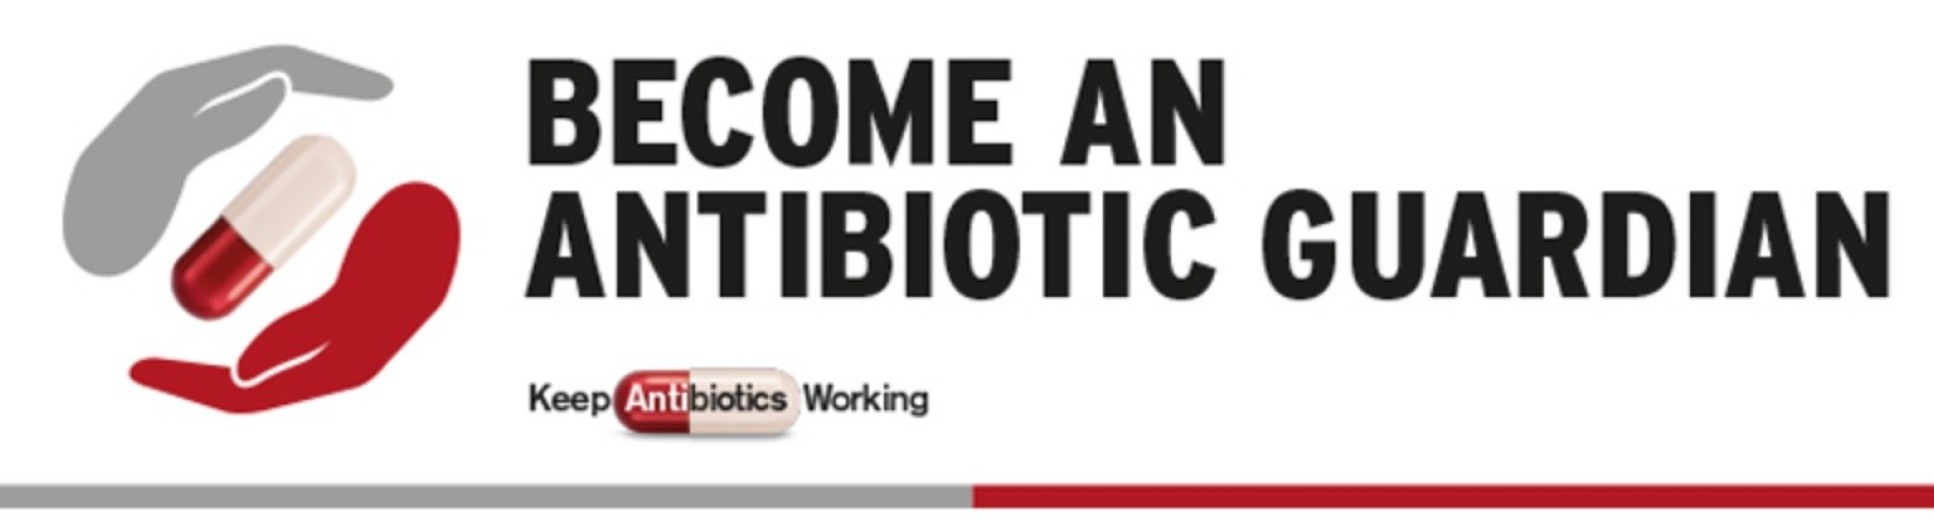 Text: Become and Antibiotic Guardian with 